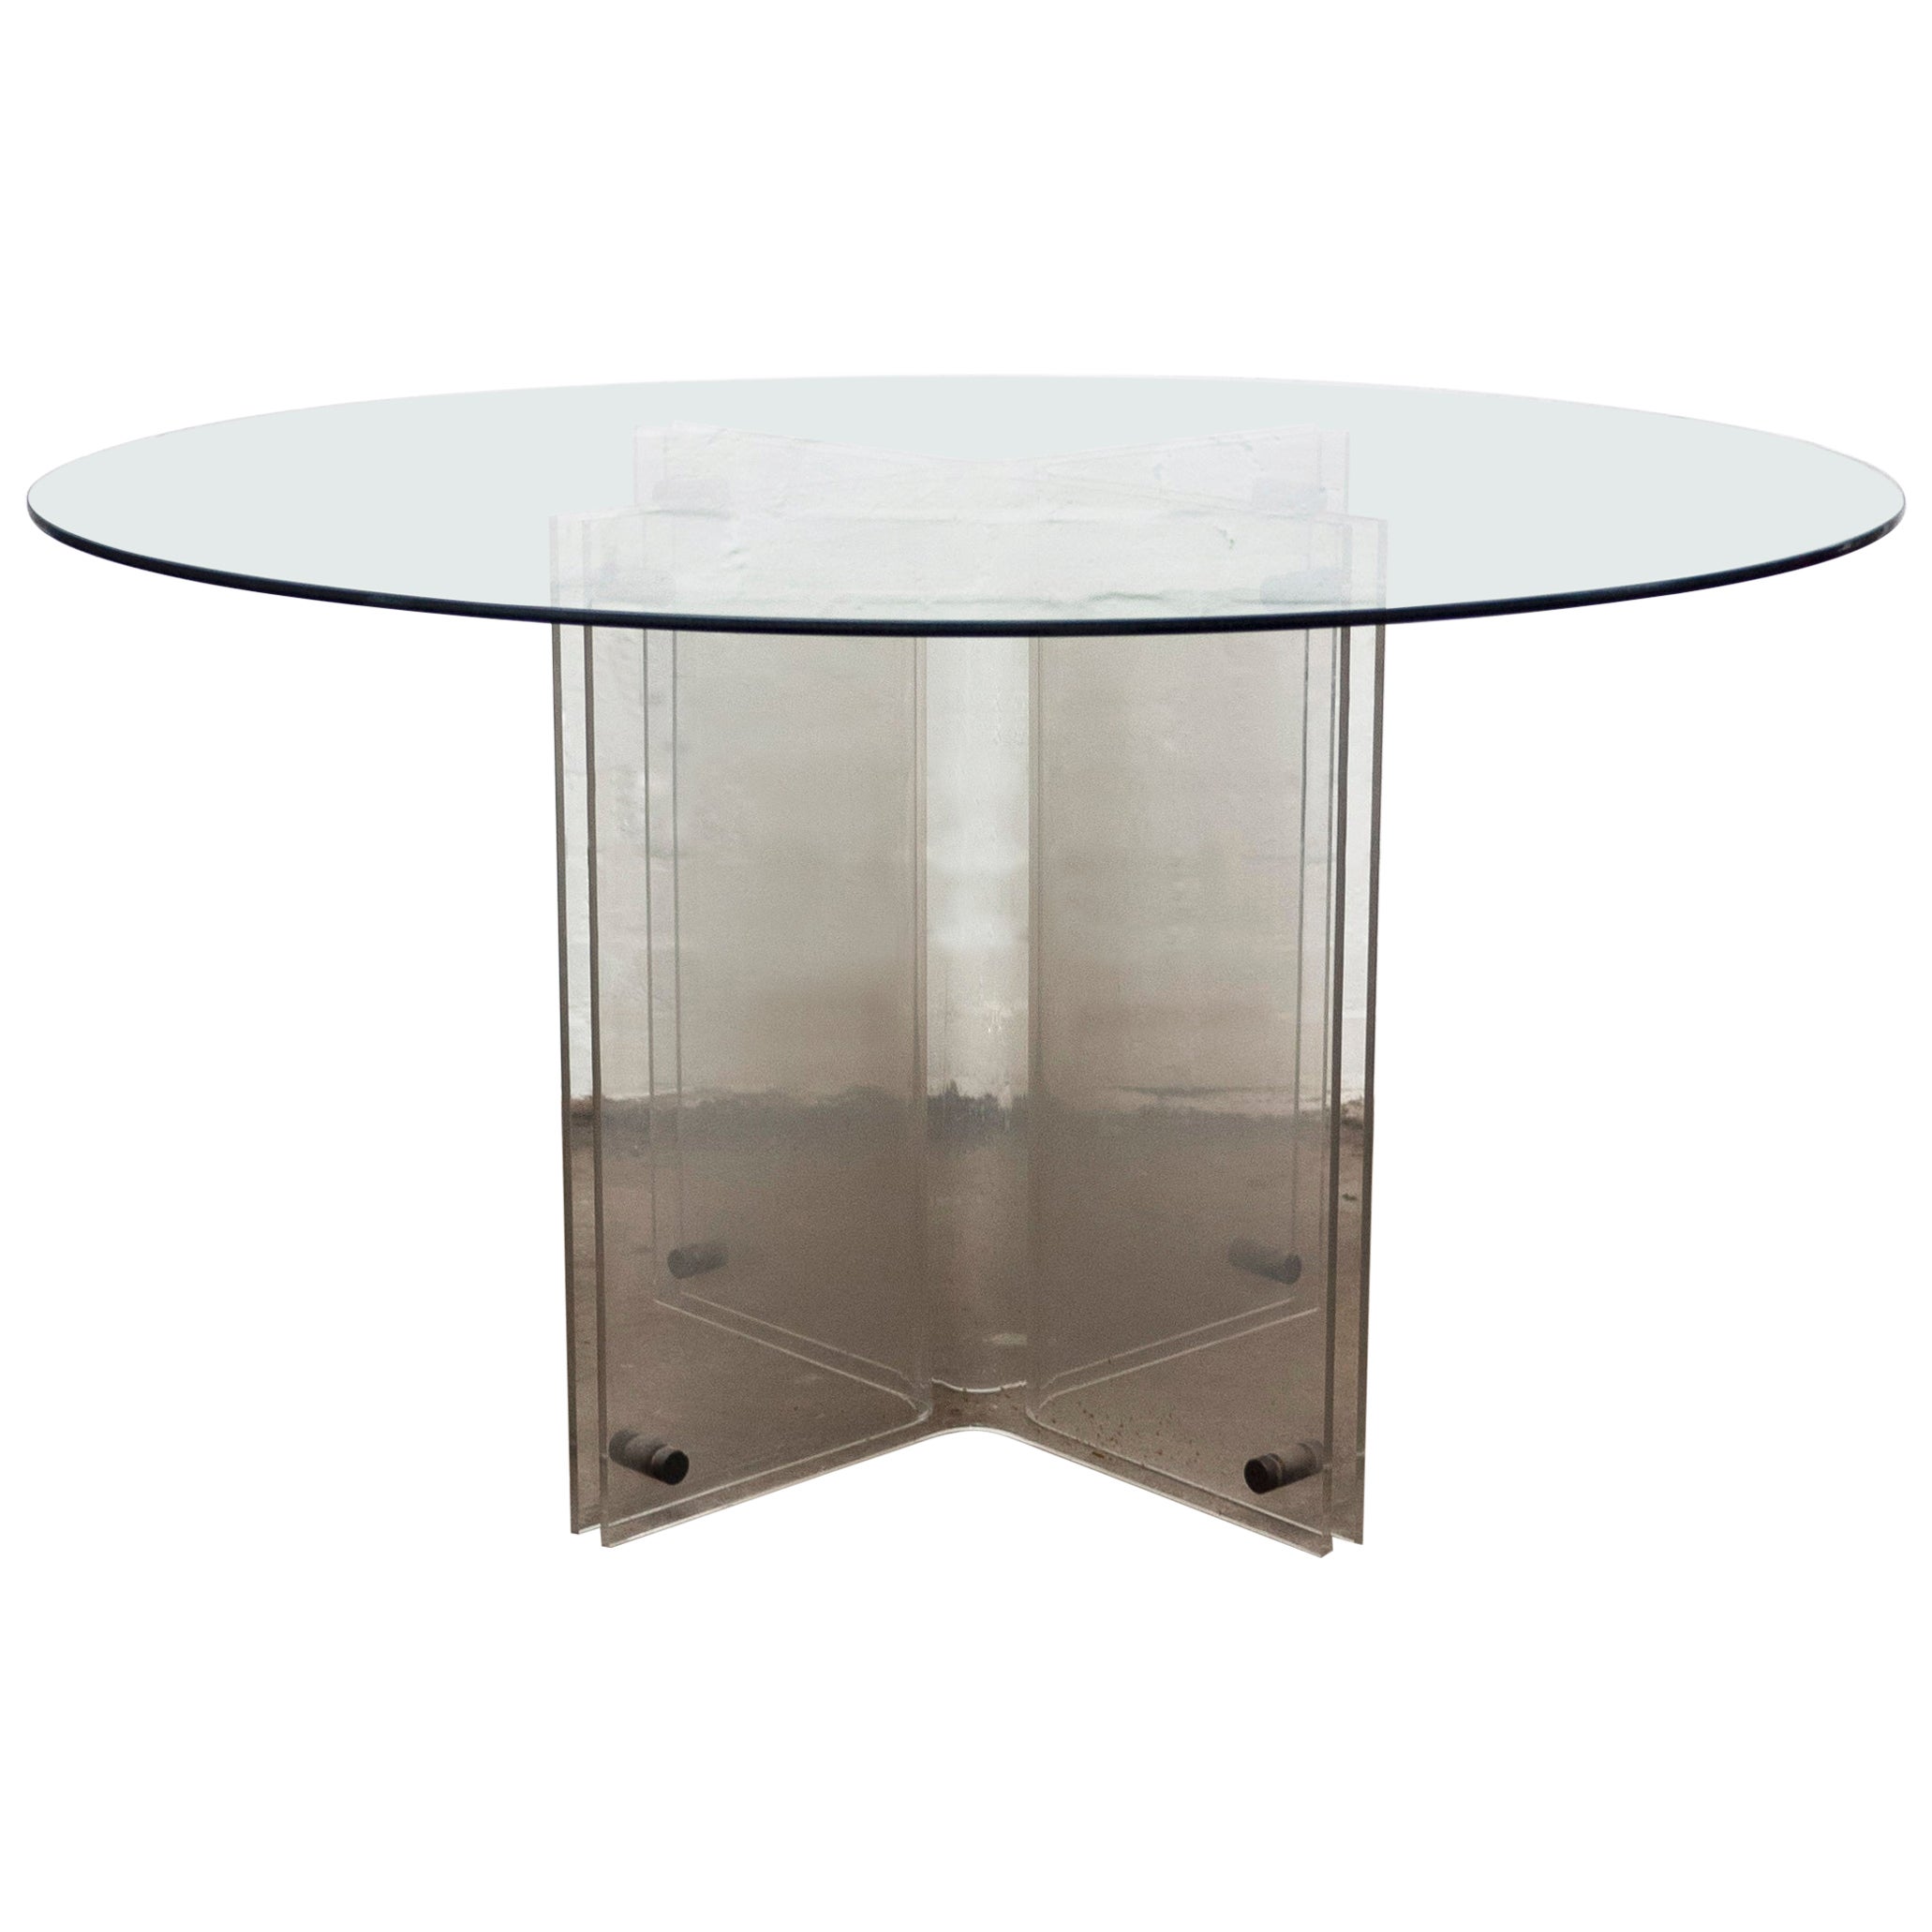 Vintage Hollywood Regency Lucite and Glass Round Dining Table, 1980s